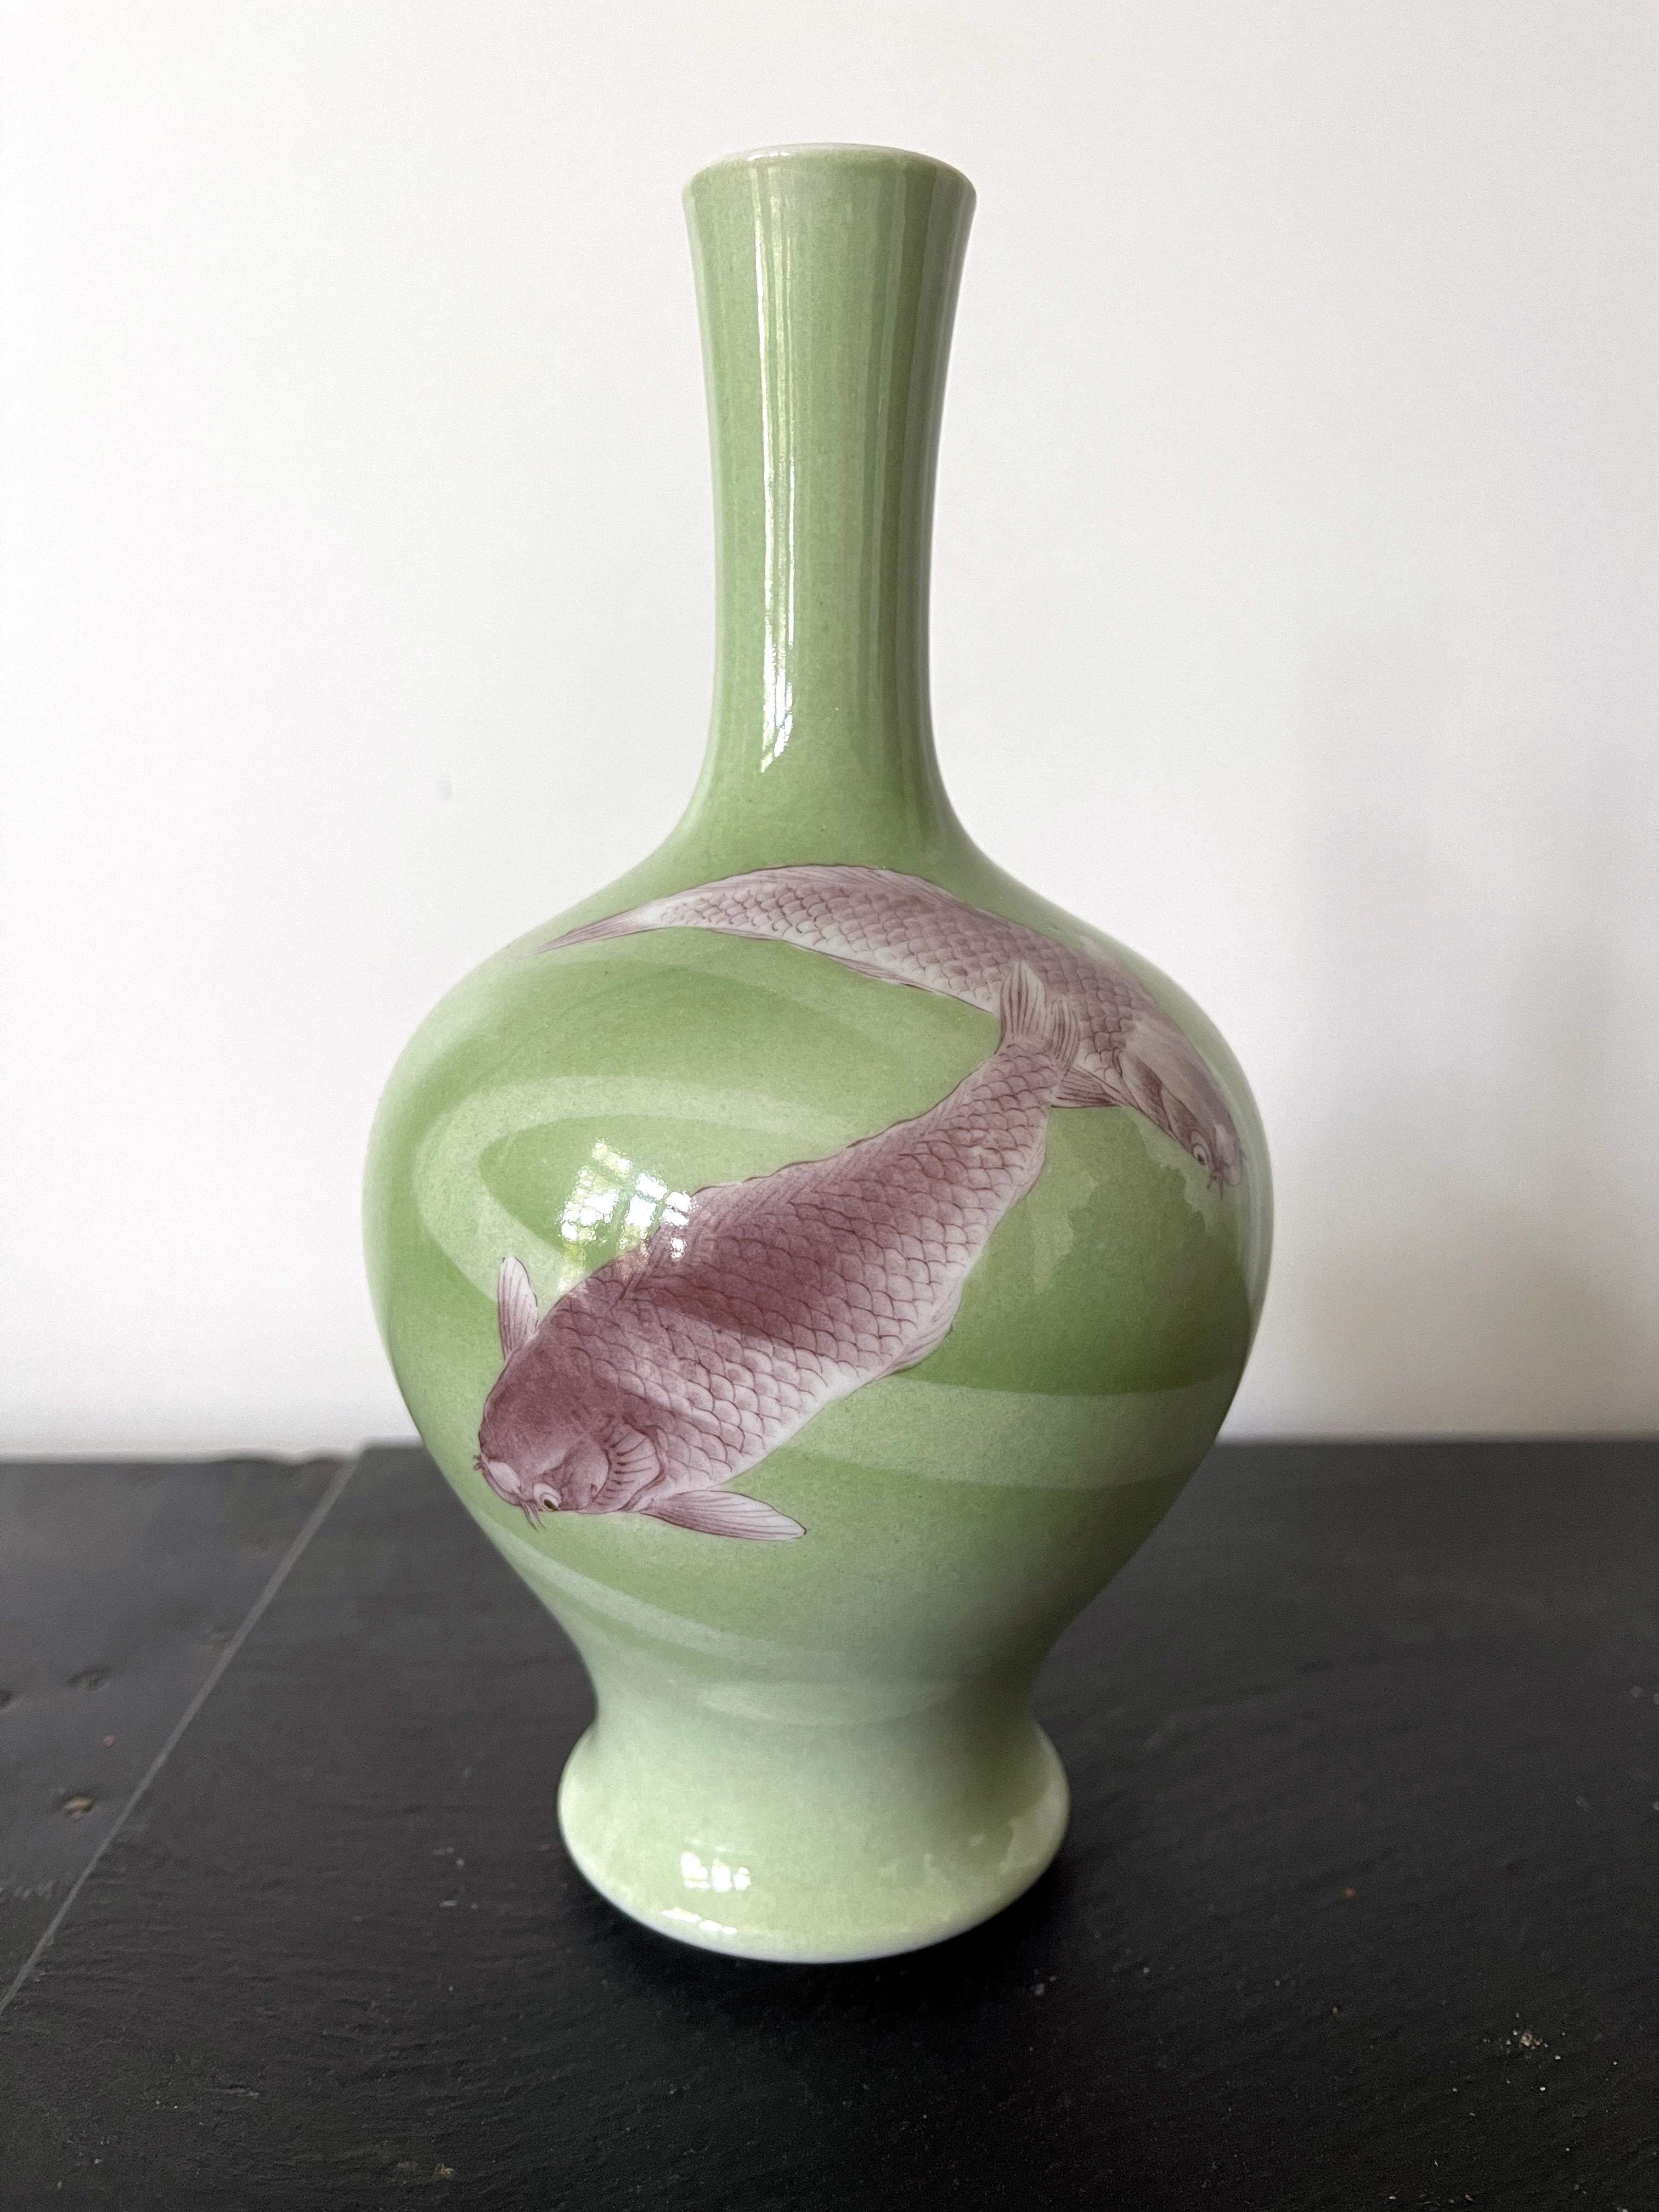 A Japanese long neck porcelain vase circa 1900-1910s by the studio of Miyagawa Kozan (1842–1916), one of the most established and collected Japanese ceramist from the end of Meiji Period. Commonly known as Makuzu Kozan, which also appears as the